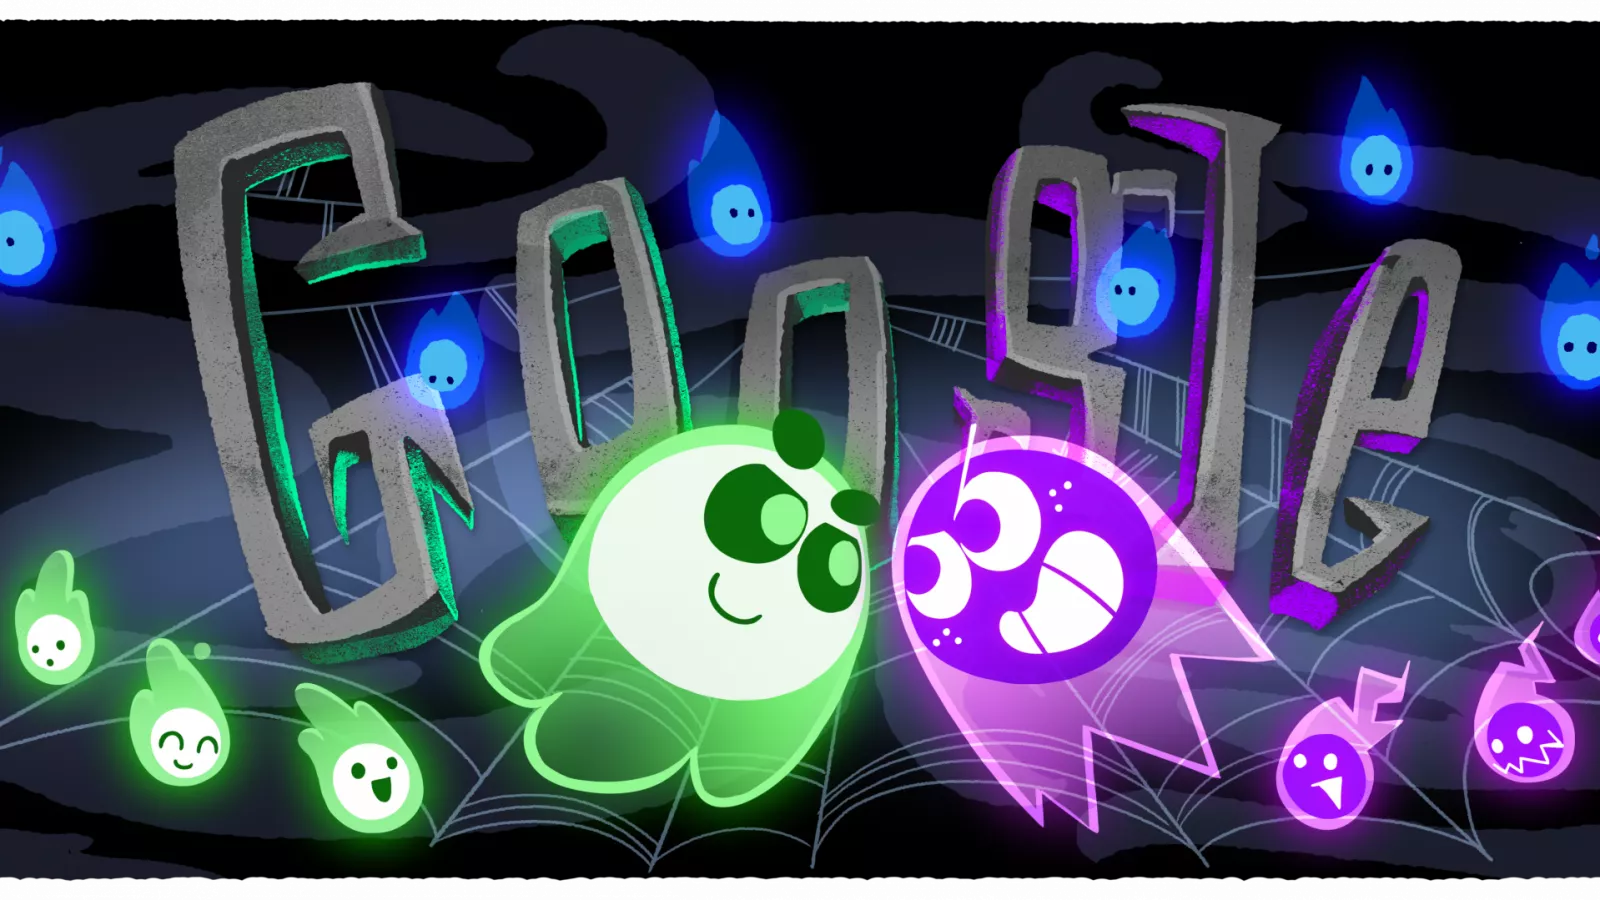 Why won't Google's Halloween 2018 doodle game work? - Quora